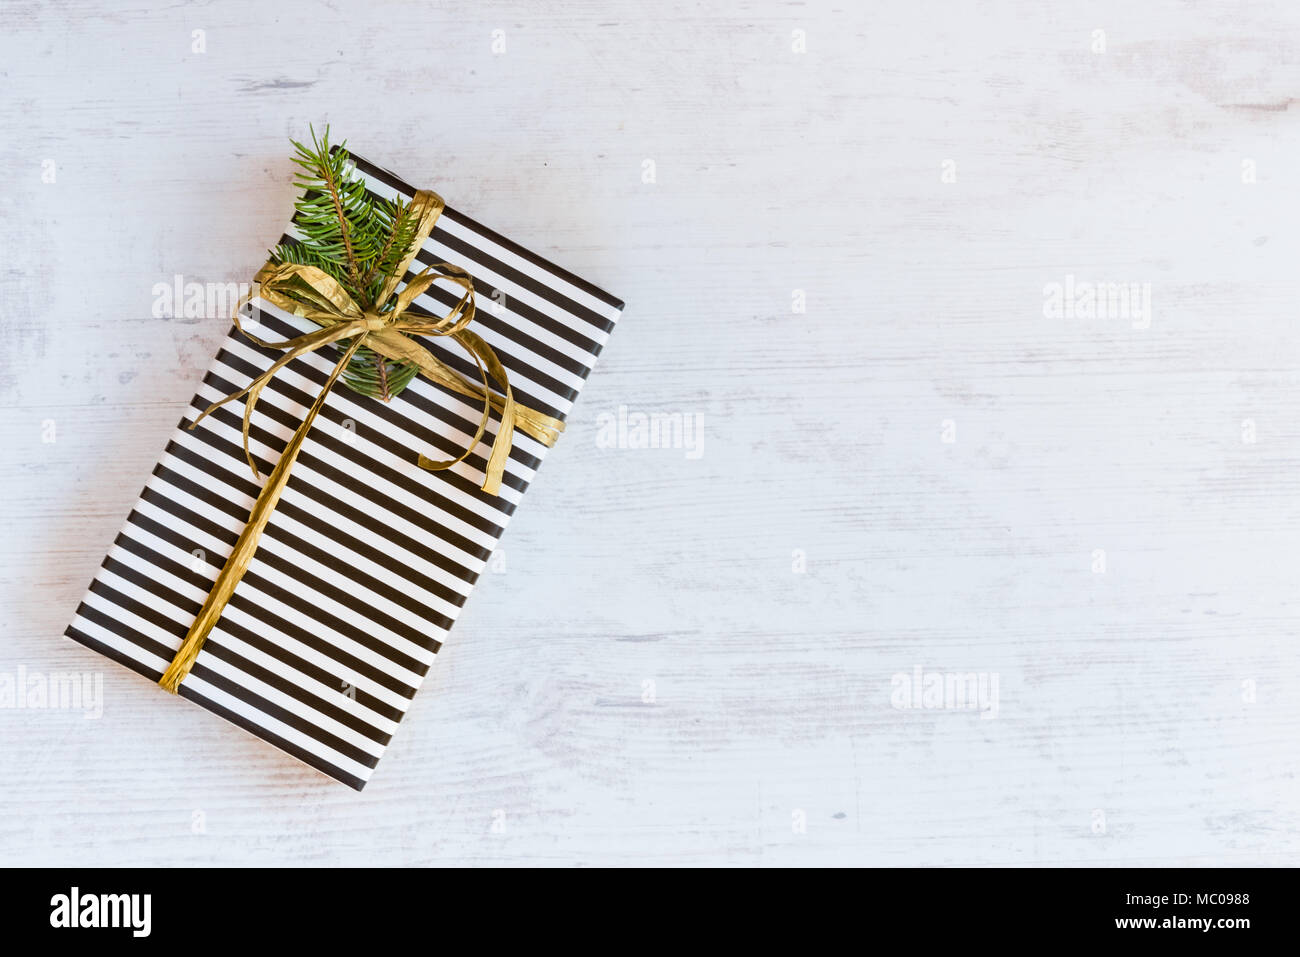 Gift box wrapped in black and white striped paper with golden ribbon and fir branch on a white wooden background. Christmas concept. Stock Photo